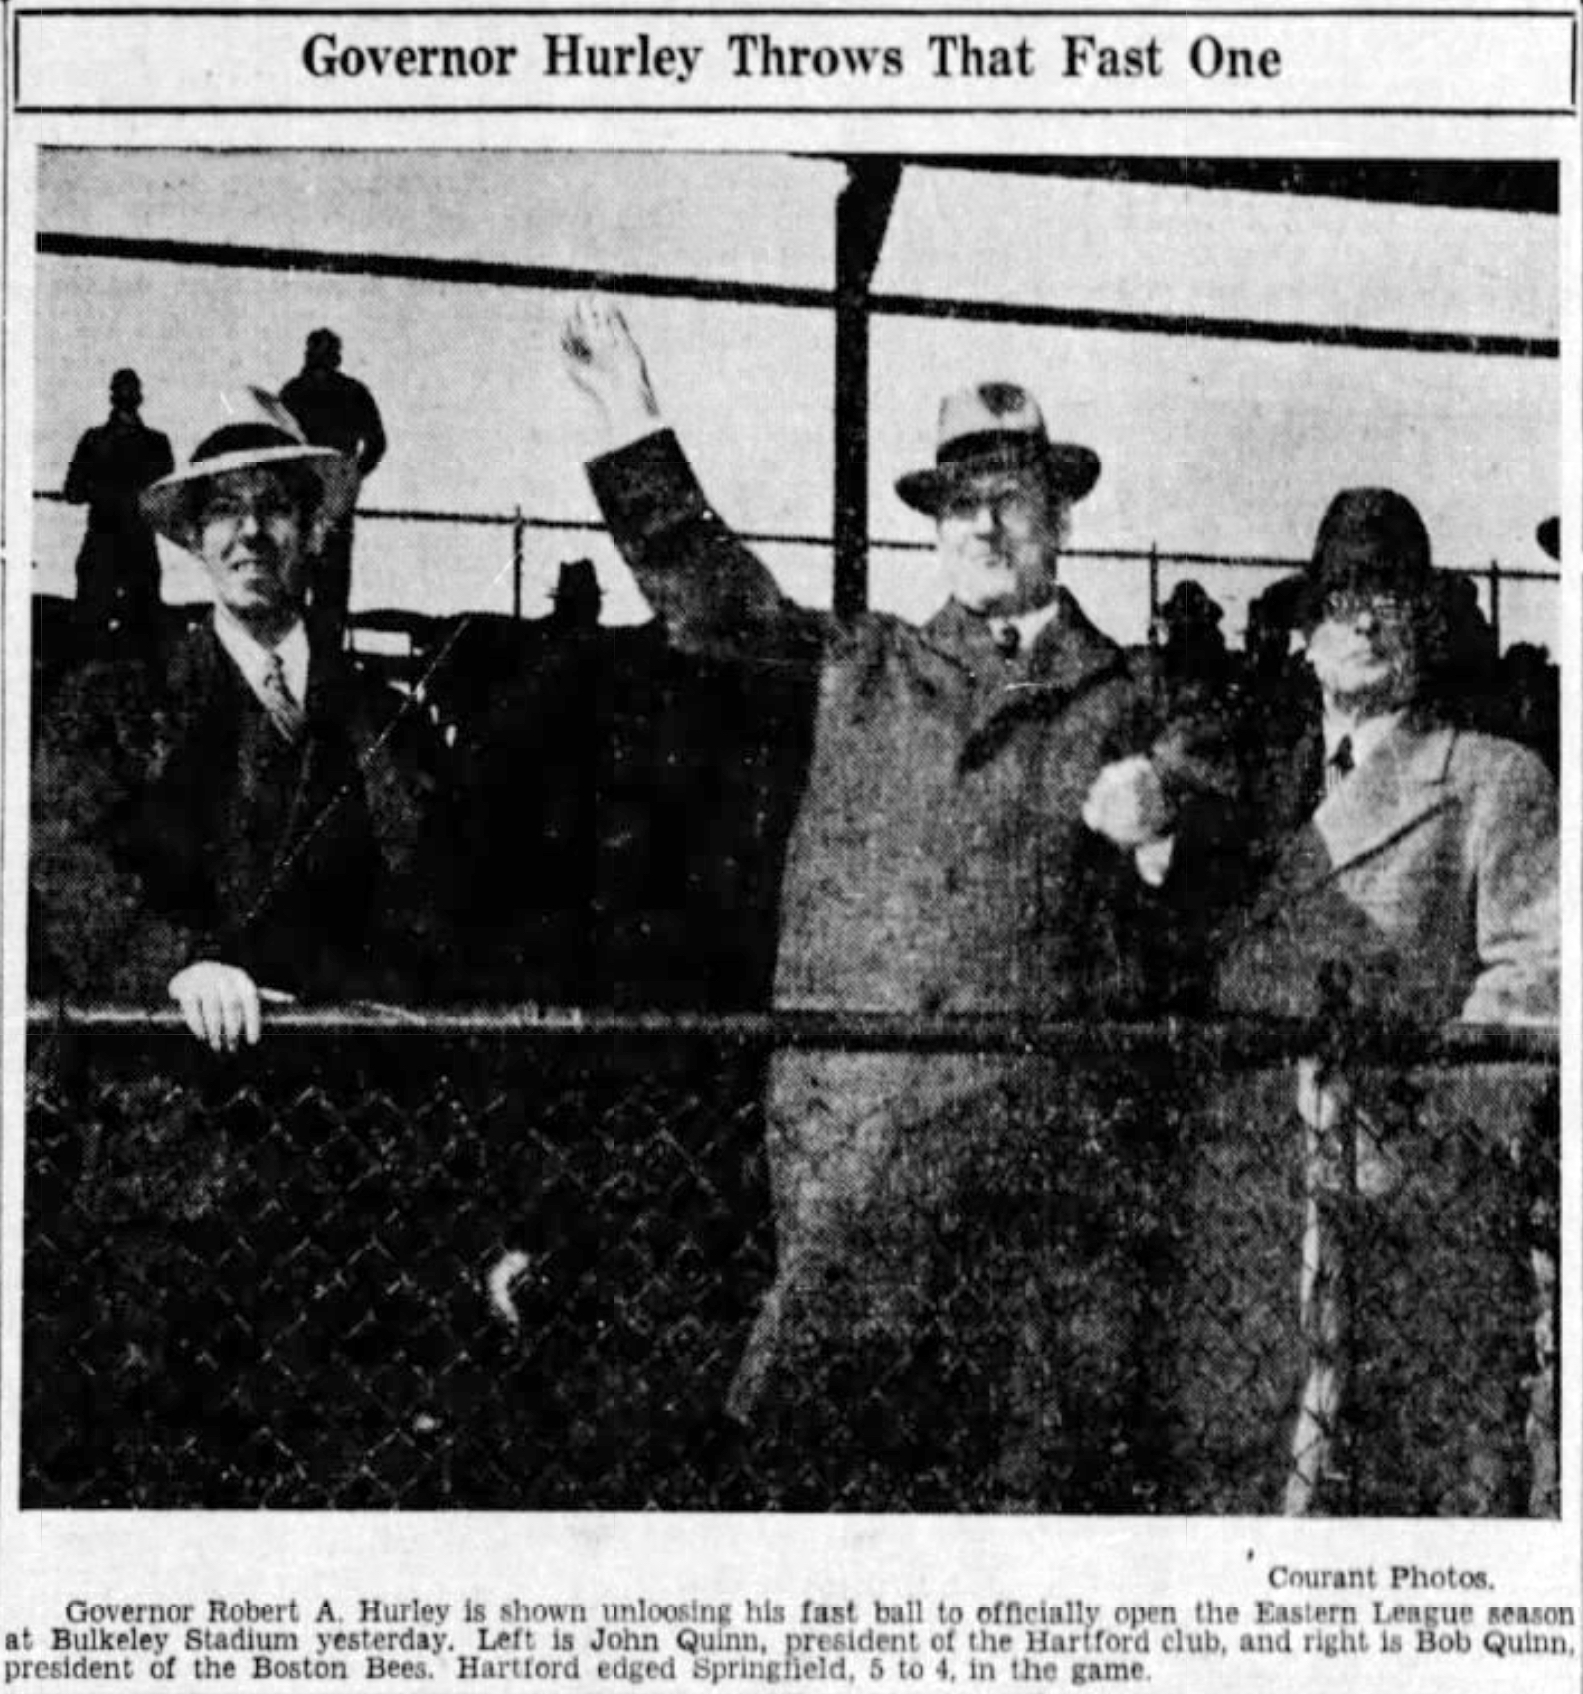 Governor Robert A. Hurley throws out the ceremonial first pitch on Opening Day of the Hartford Bees at Bulkeley Stadium, 1941.